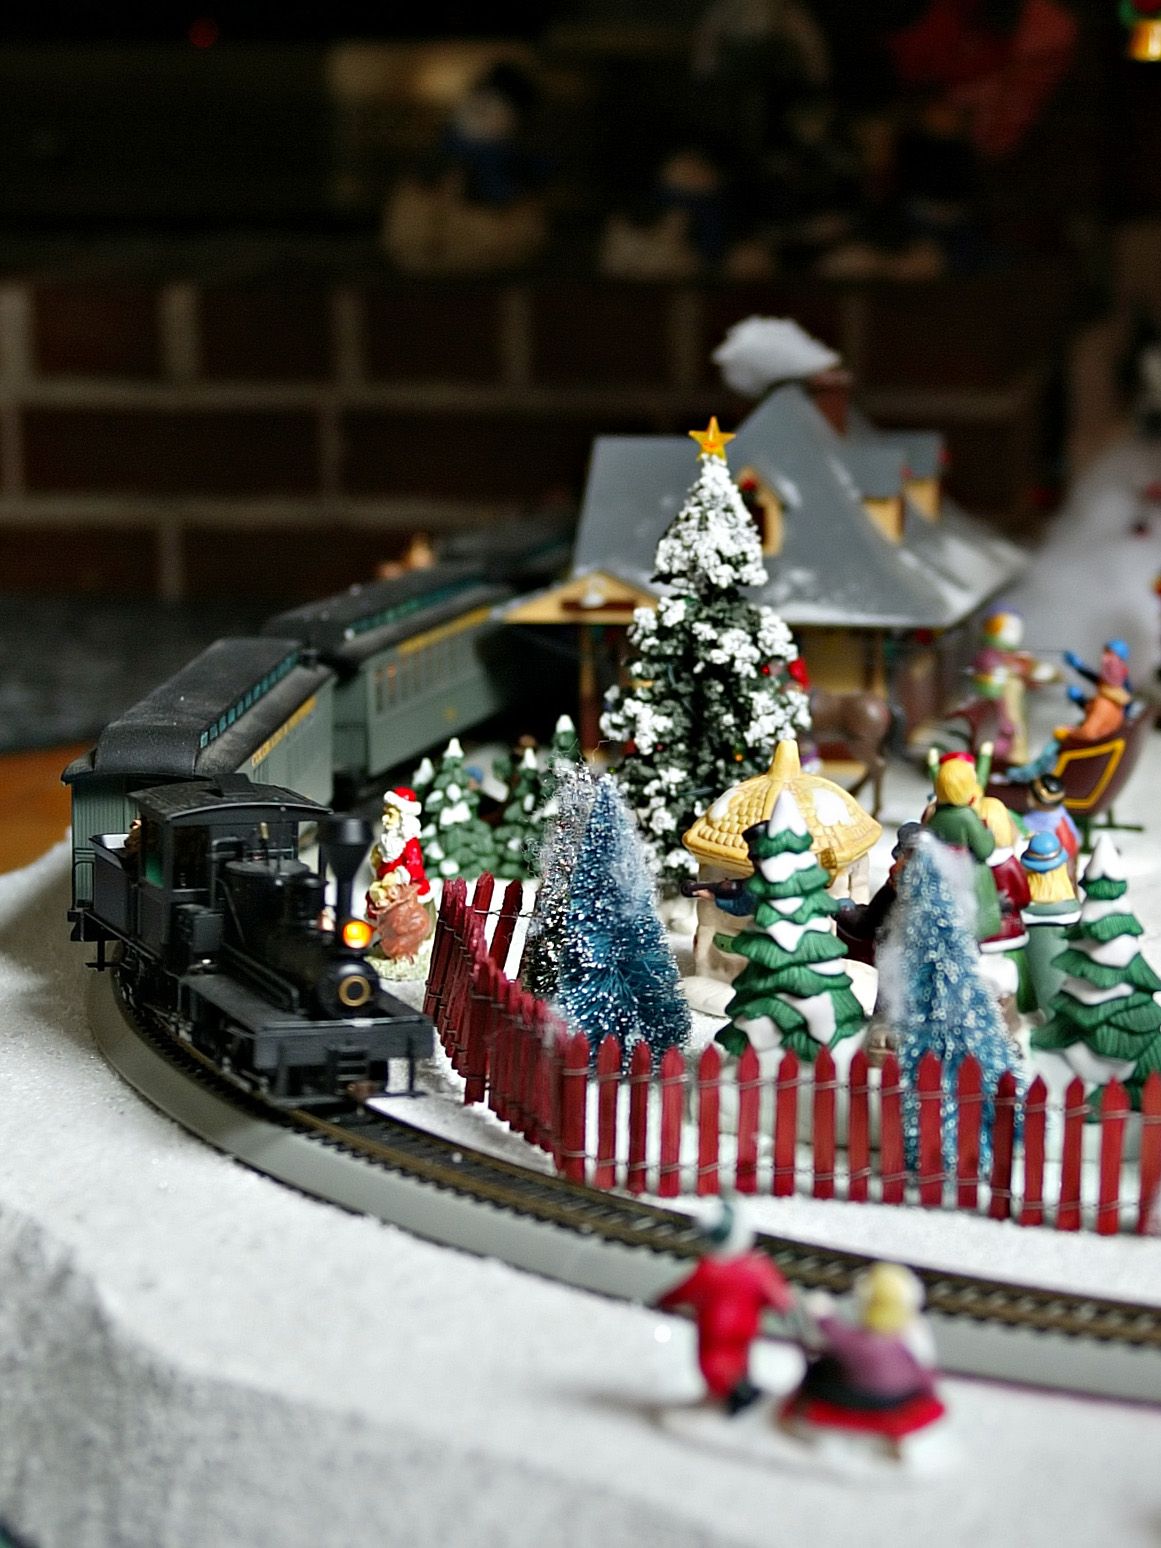 Things To Do With The Kids, Through December 15: Holiday Train Show, Funkijam Family Musical, And Make Your Own Kwanzaa Wreaths